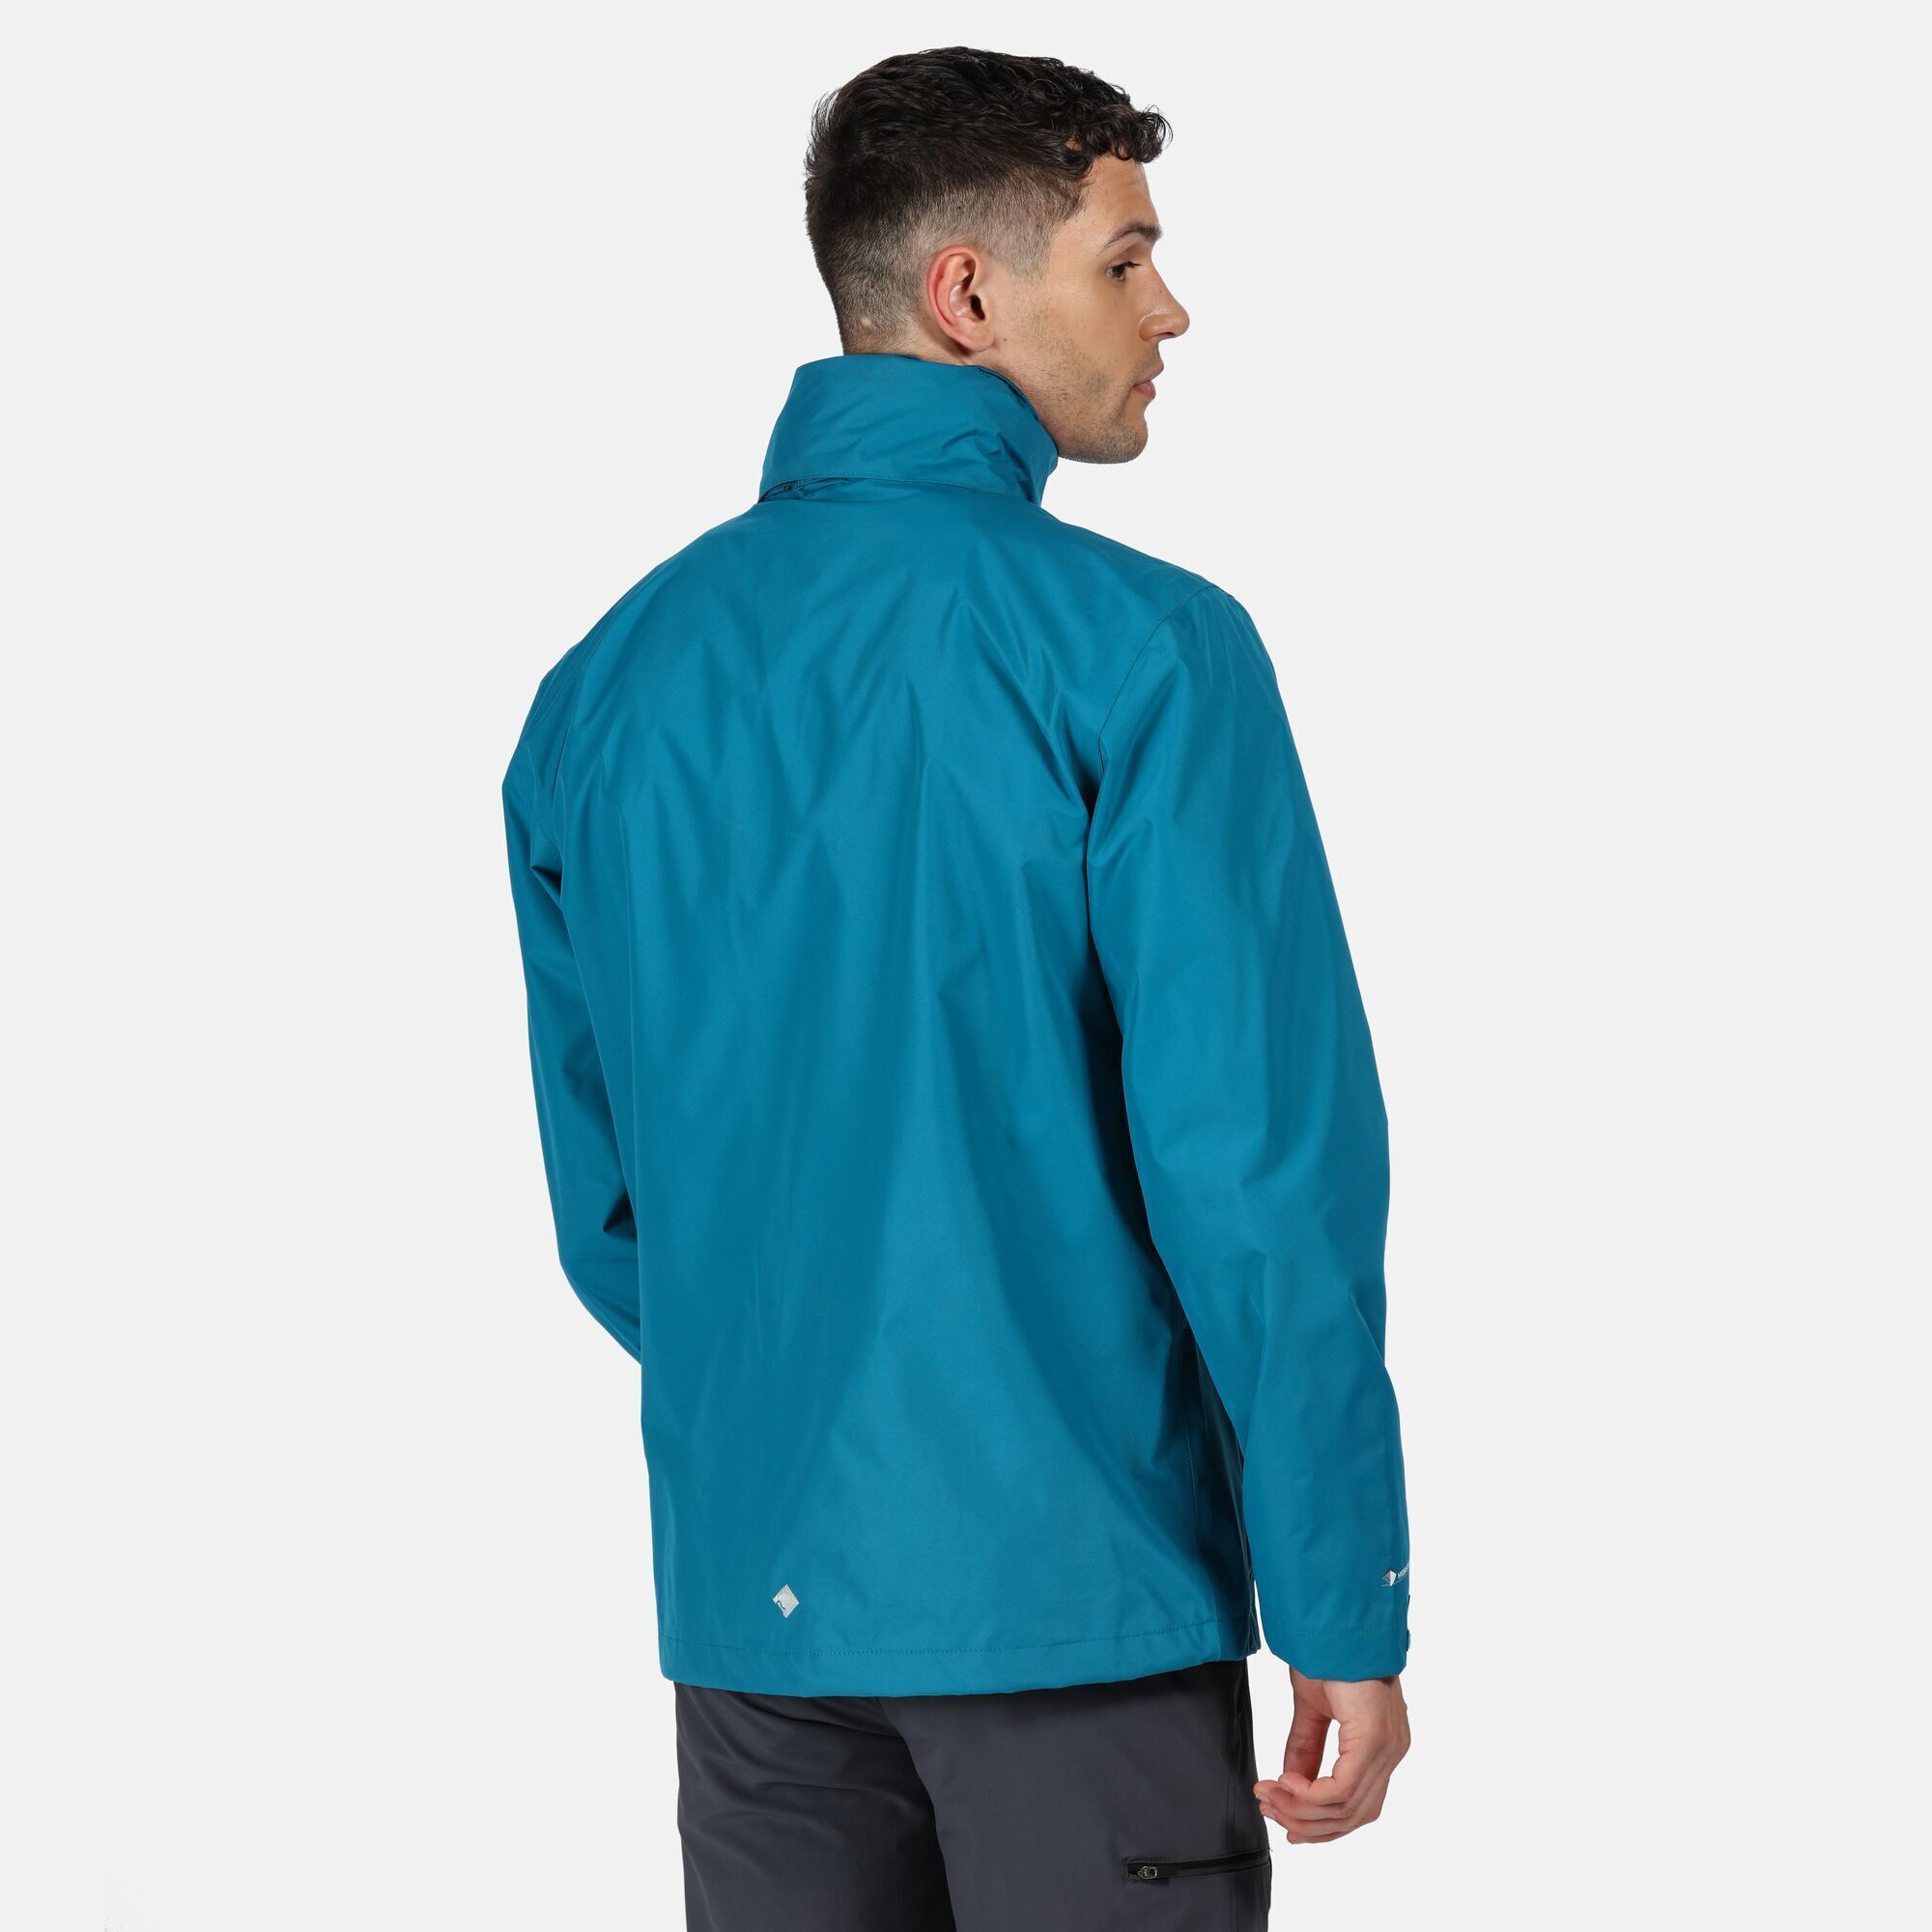 The mens Matt is a classic waterproof shell jacket styled with a relaxed everyday fit for weekend strolls or day-to-day wear. Its made from seam sealed Hydrafort fabric to guard against showers and comes fully lined for next-to-skin comfort. The adjustable hood zips away during dry spells and the hem can be pulled in for a close, breeze-blocking fit. Finished with two zipped pockets for keys, phones (and dog biscuits). 100% Polyester. Regatta Mens sizing (chest approx): XS (35-36in/89-91.5cm), S (37-38in/94-96.5cm), M (39-40in/99-101.5cm), L (41-42in/104-106.5cm), XL (43-44in/109-112cm), XXL (46-48in/117-122cm), XXXL (49-51in/124.5-129.5cm), XXXXL (52-54in/132-137cm), XXXXXL (55-57in/140-145cm).